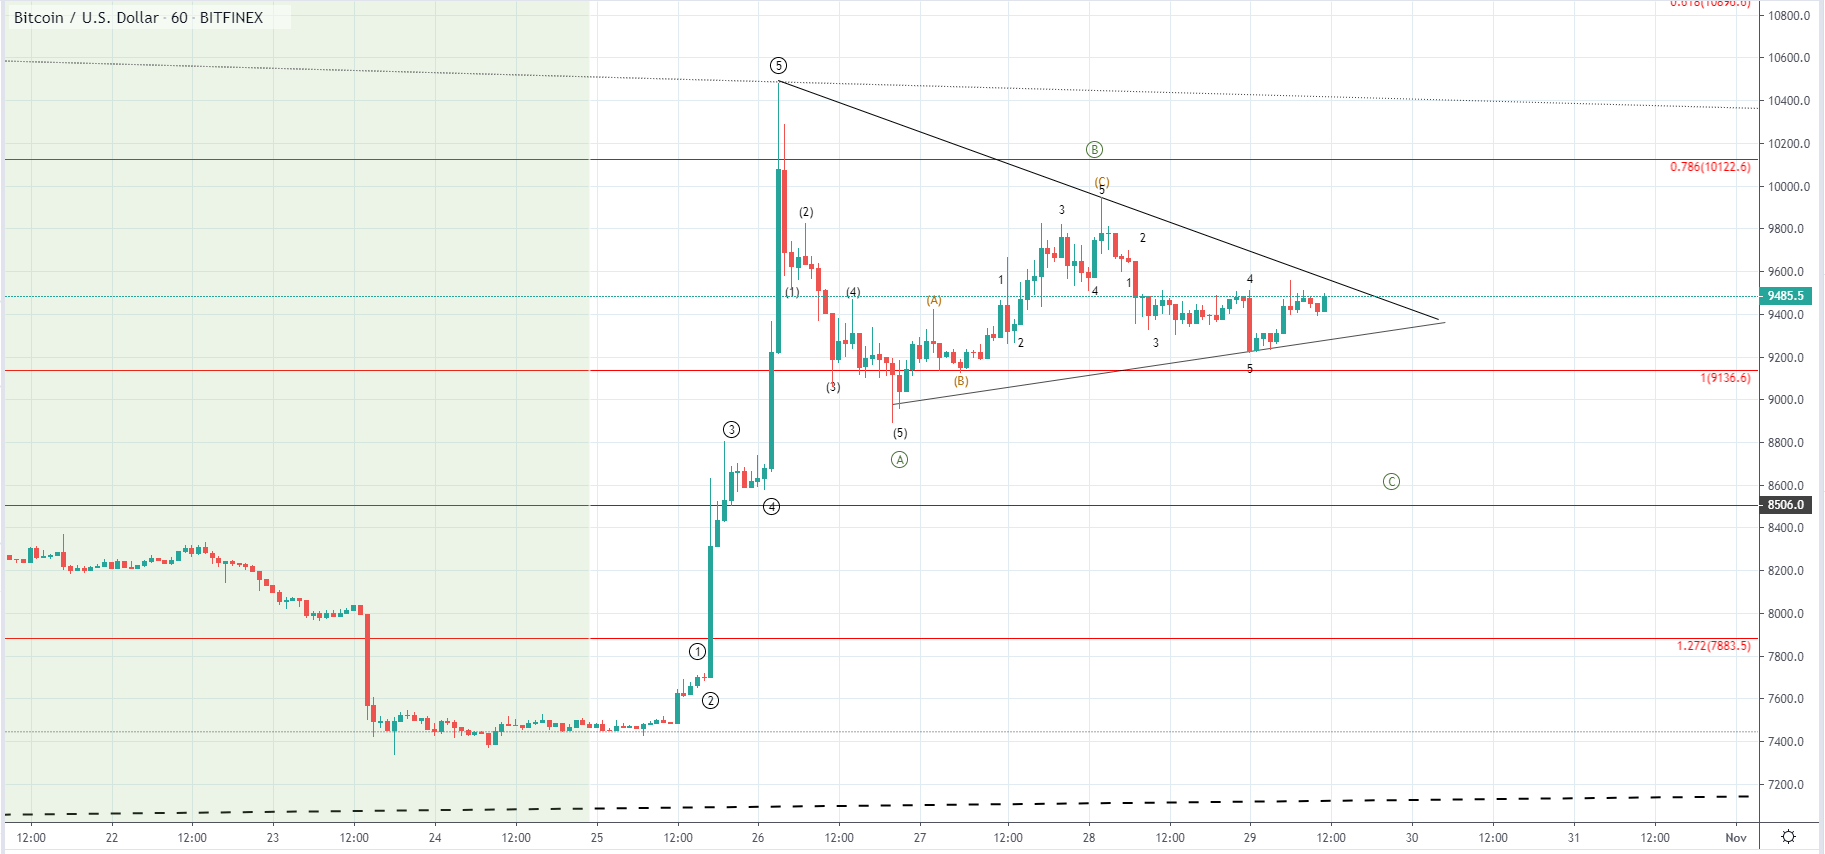 BTC and XRP - Bullish price action is likely to continue